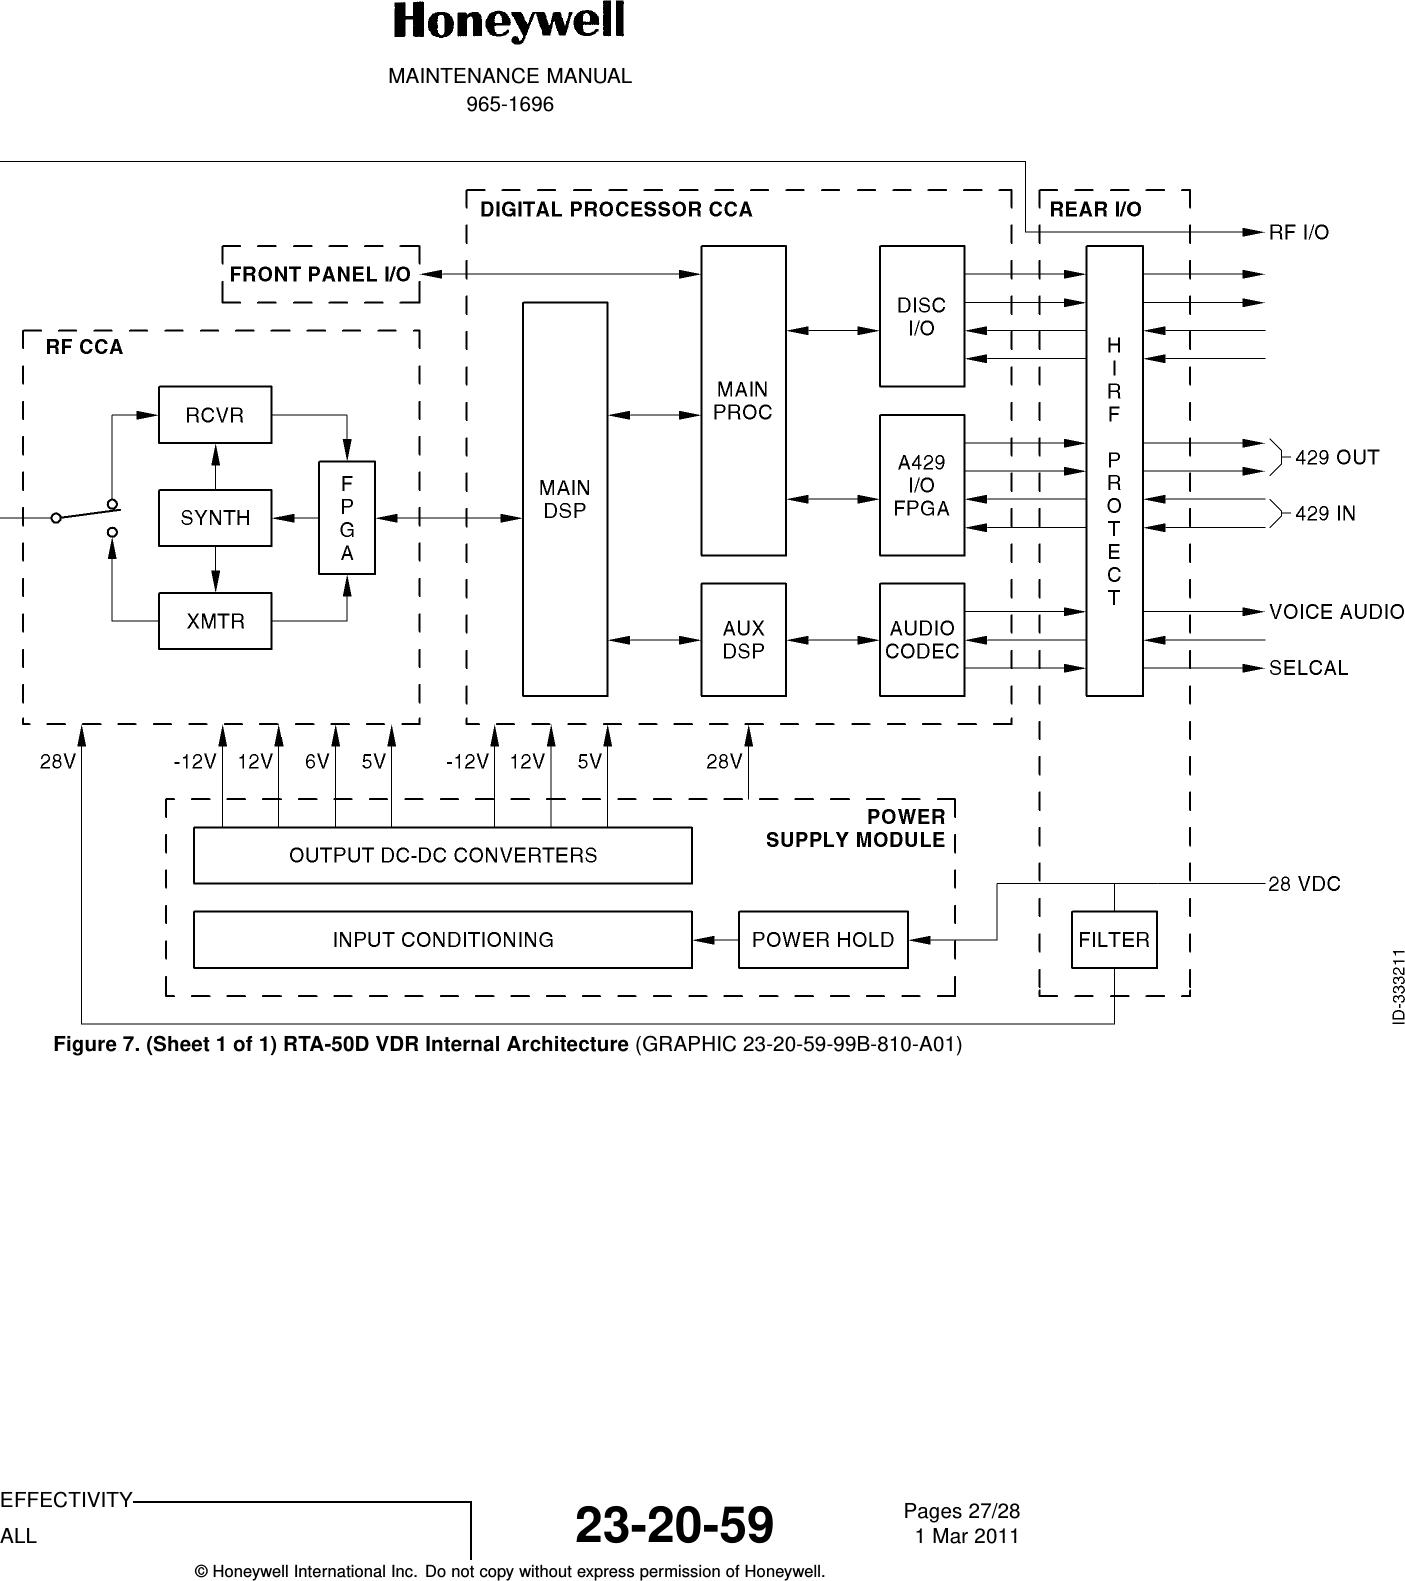 MAINTENANCE MANUAL965-1696Figure 7. (Sheet 1 of 1) RTA-50D VDR Internal Architecture (GRAPHIC 23-20-59-99B-810-A01)EFFECTIVITYALL 23-20-59 Pages 27/281 Mar 2011© Honeywell International Inc. Do not copy without express permission of Honeywell.